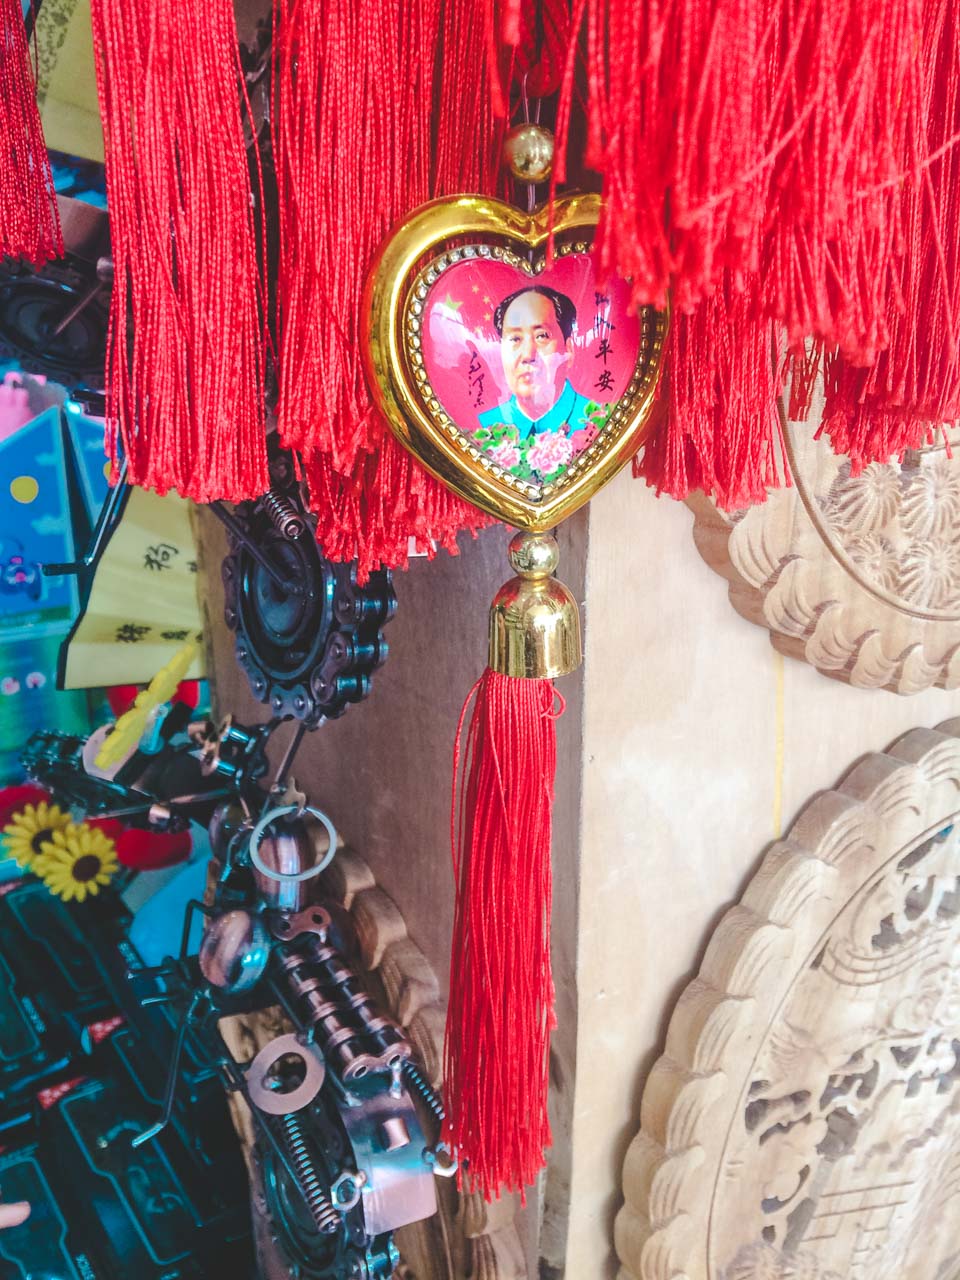 Hanging Chinese tassel with a heart-shaped portrait of Mao Zedong at a souvenir shop in Beijing